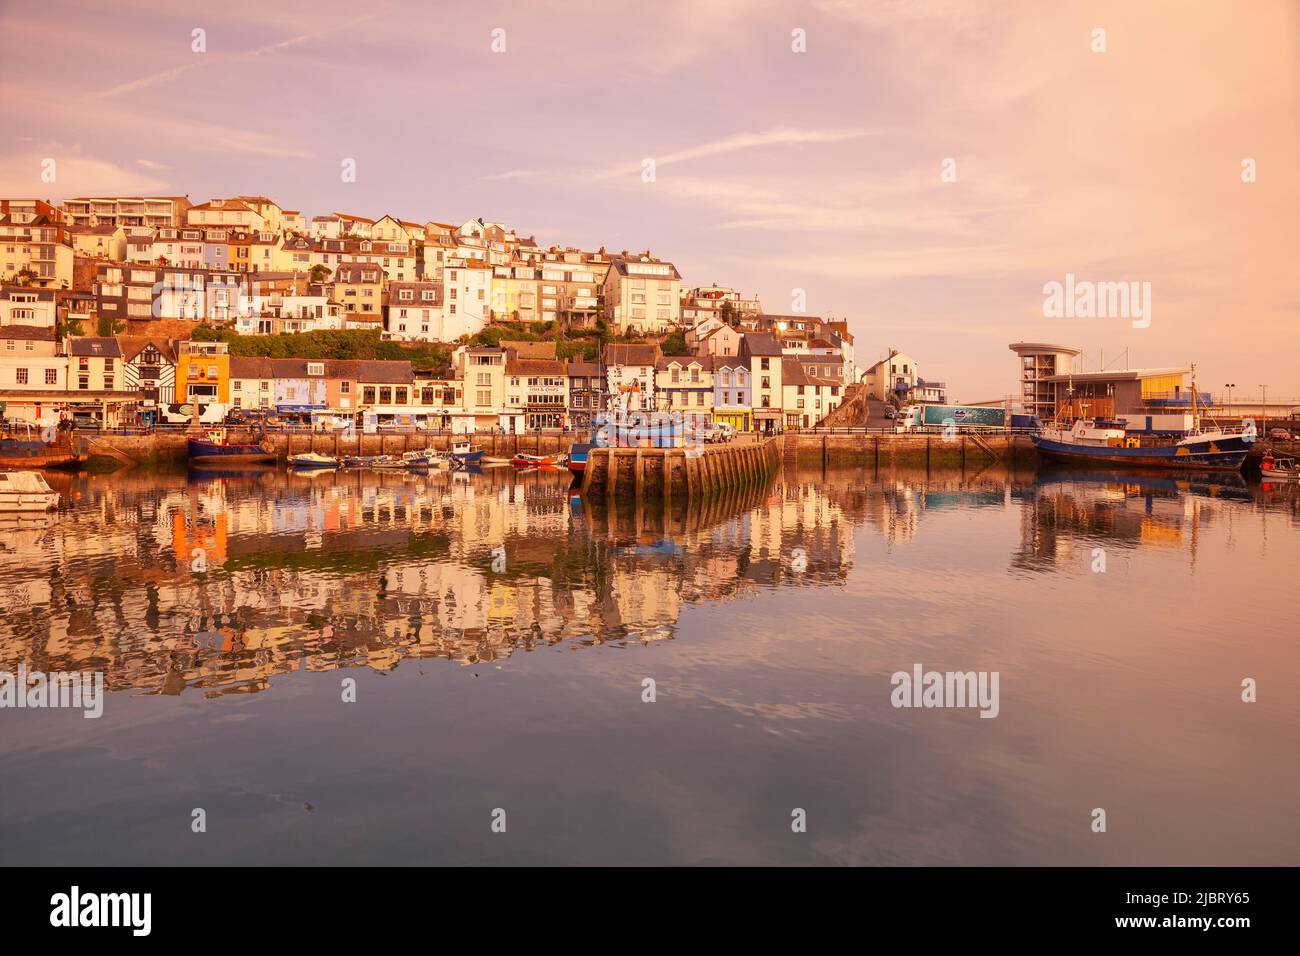 UK, England, Devon, Torbay, Brixham Harbour with The Quay and New Pier at Dawn Stock Photo